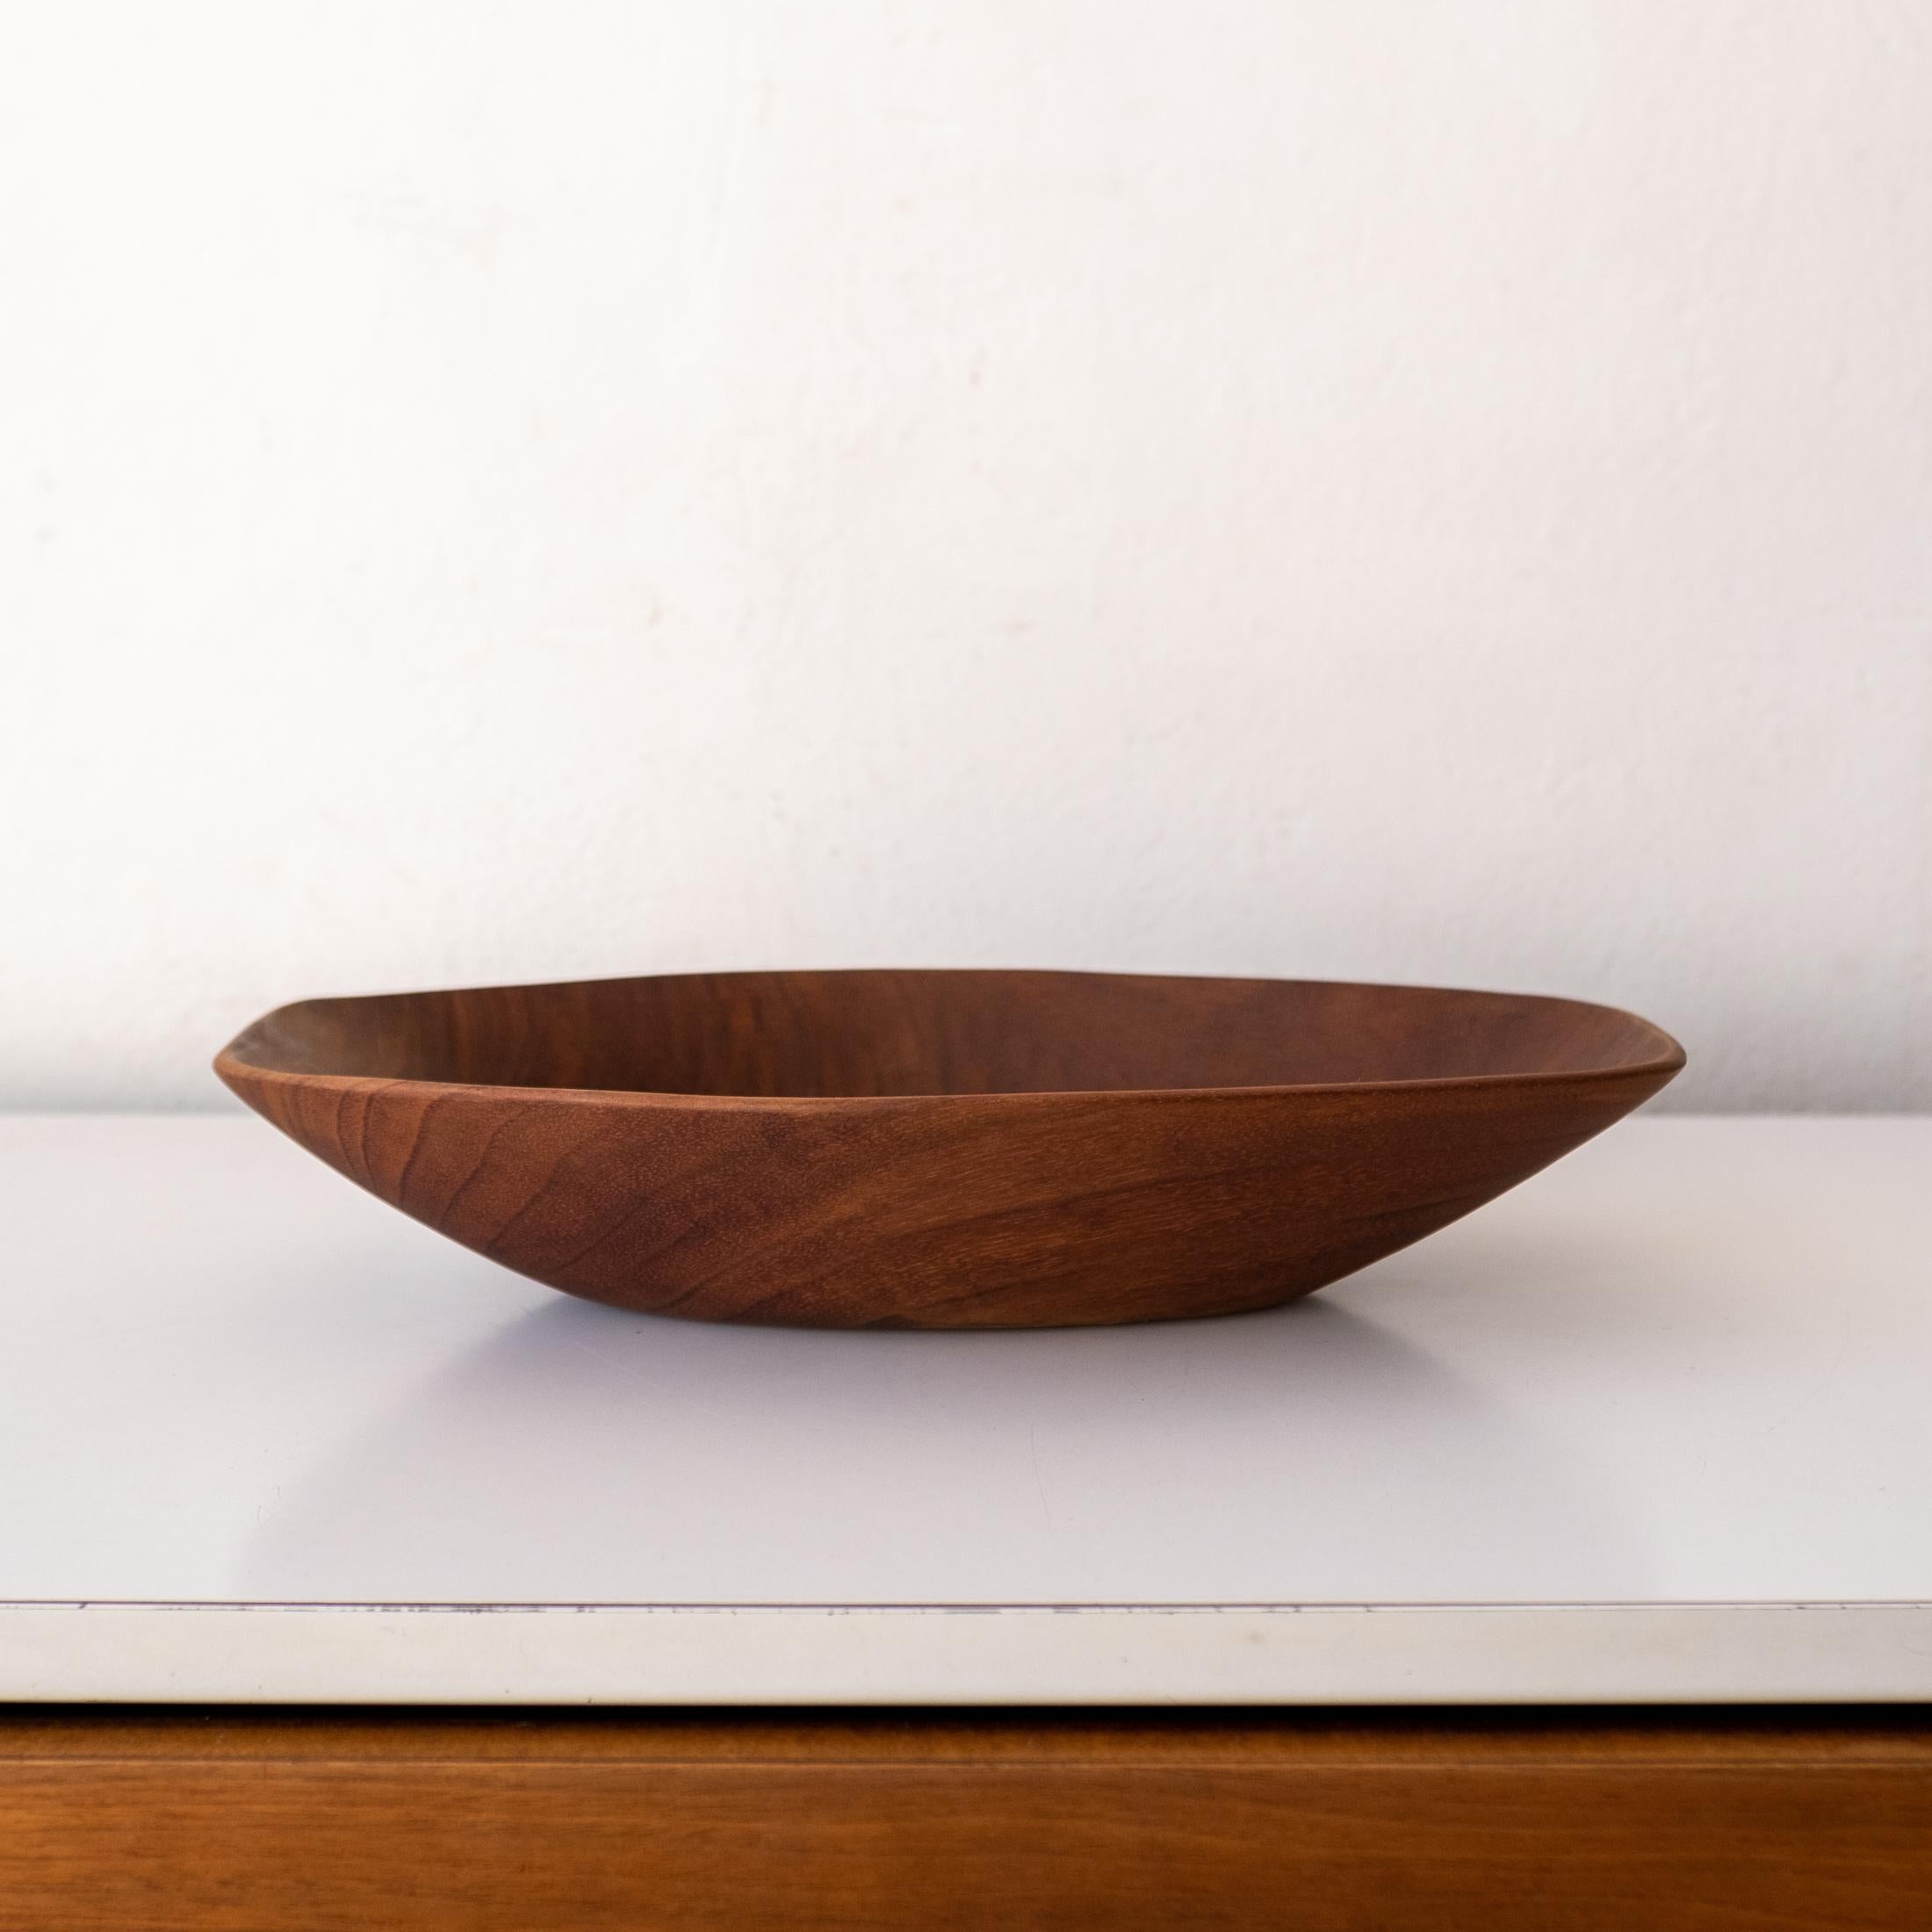 Mid-20th Century Midcentury Bowl by Mexican Modernist Don Shoemaker 1960s